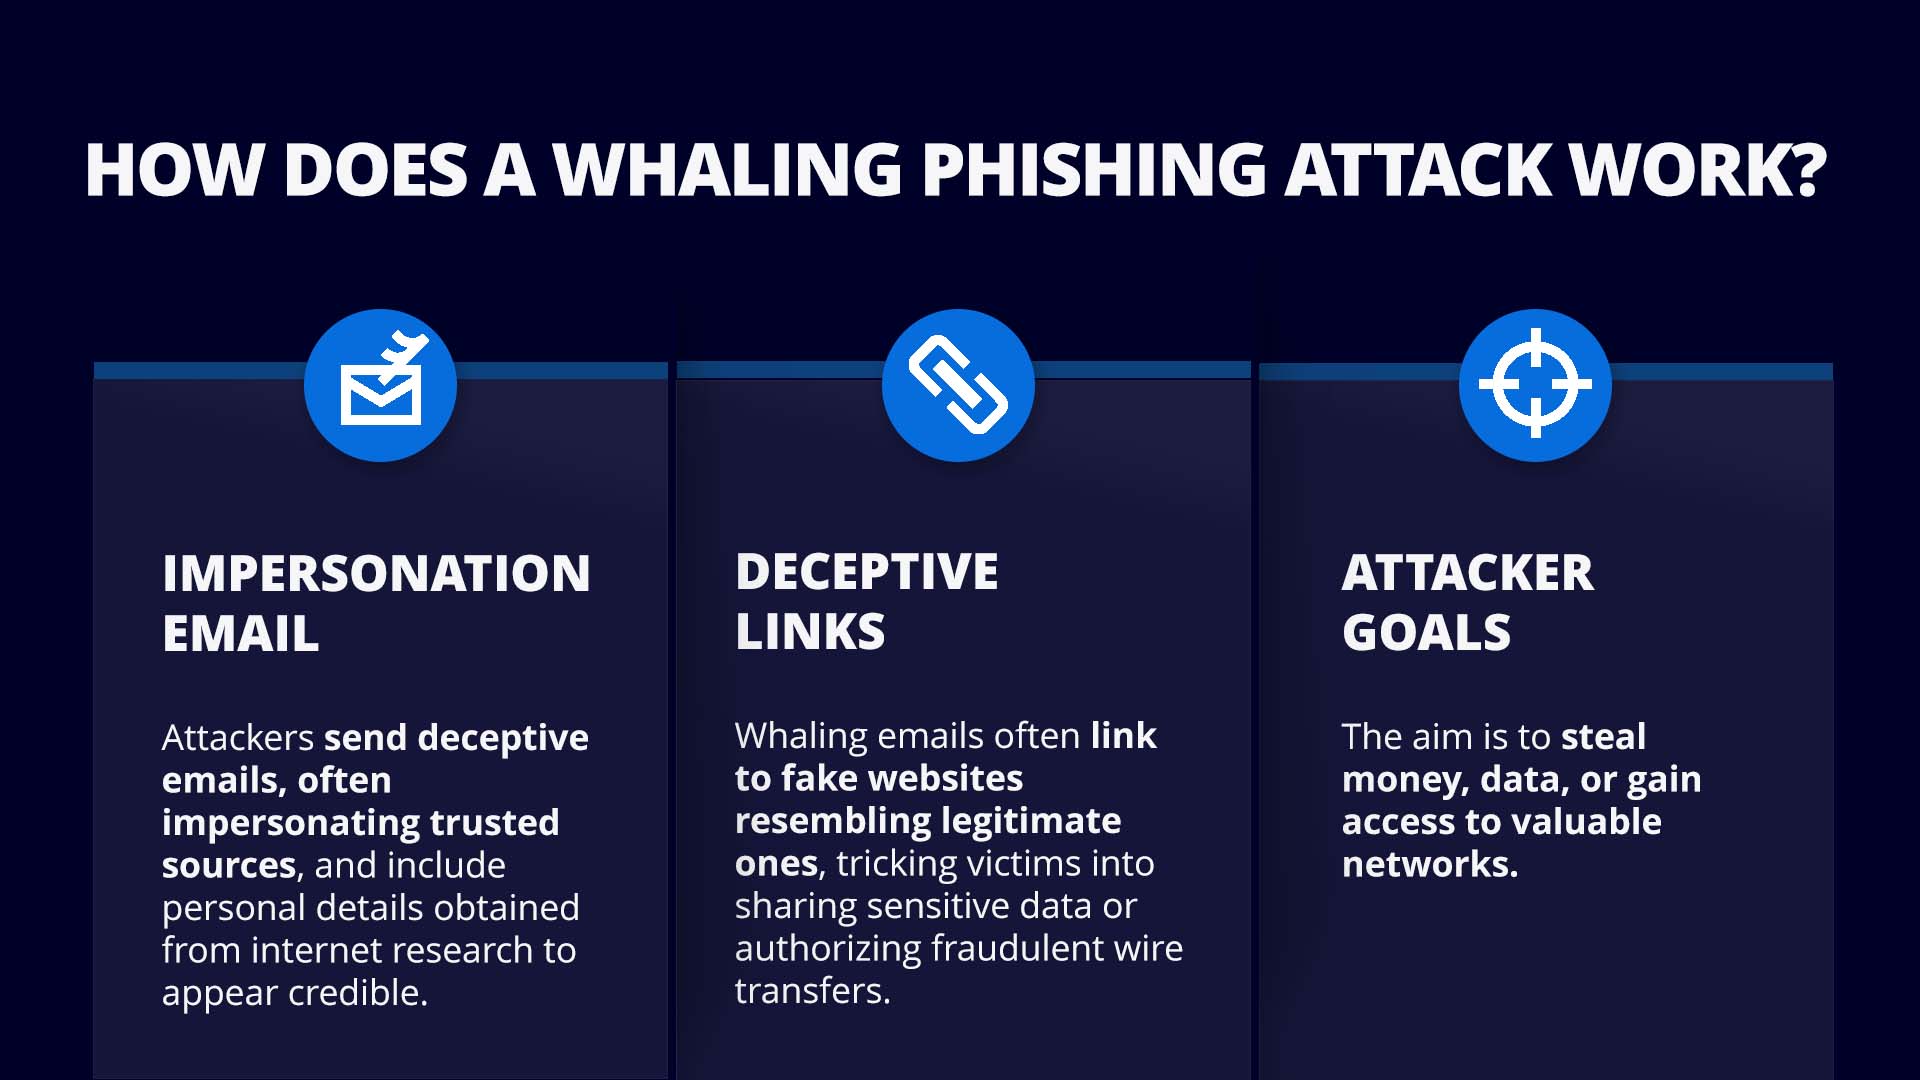 Infographic explaining how a whaling phishing attack works. Sections include impersonation email, deceptive links, and attacker goals.